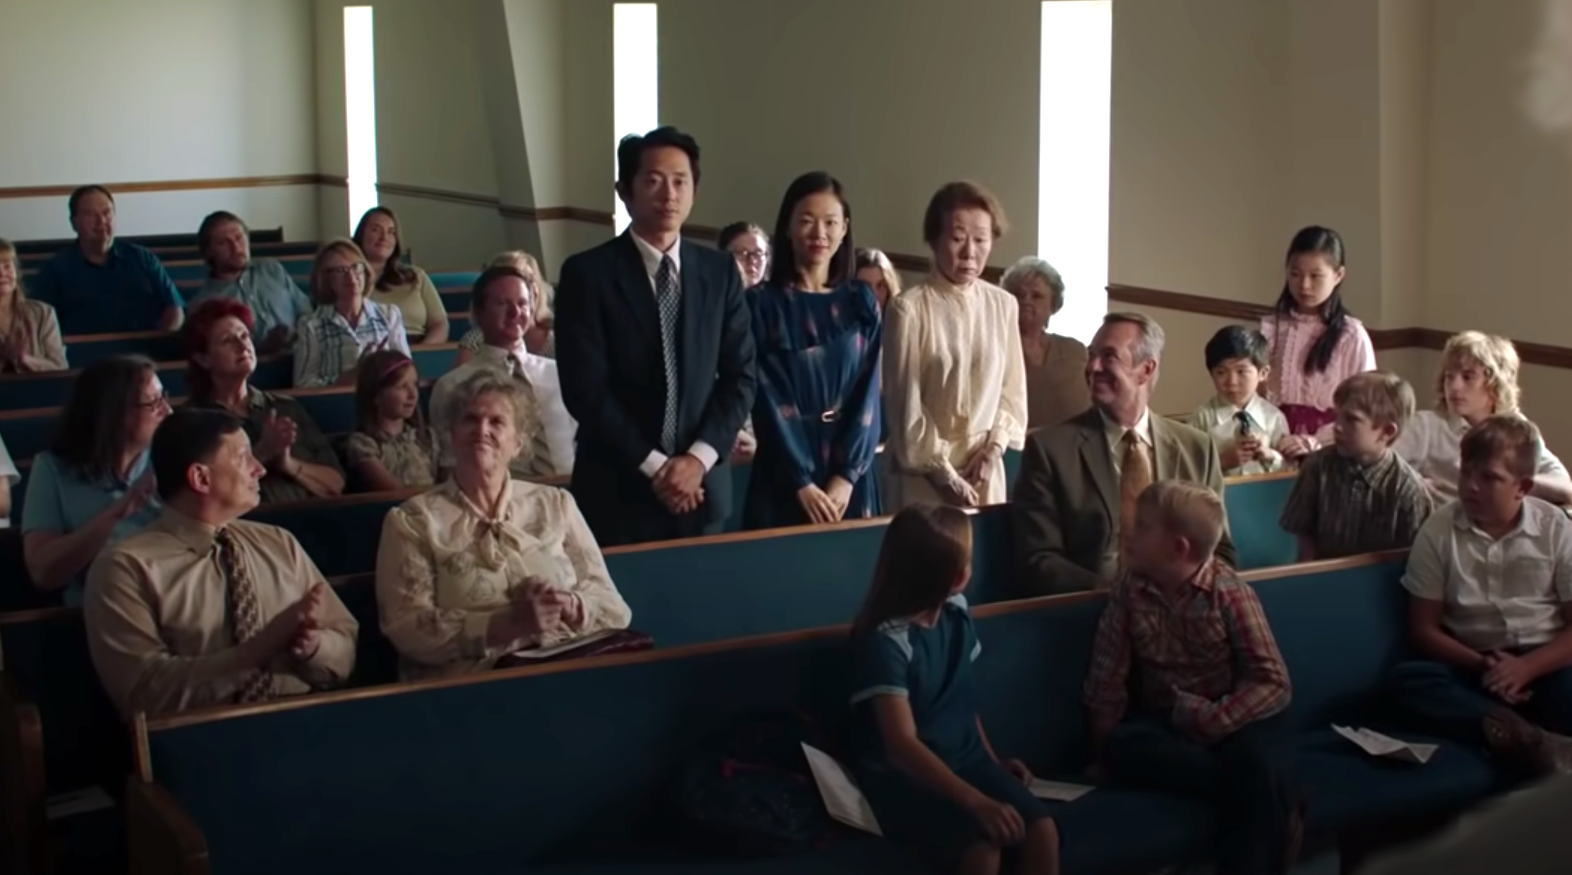 Screen shot from "Minari," a movie about a Korean family starting anew in Arkansas